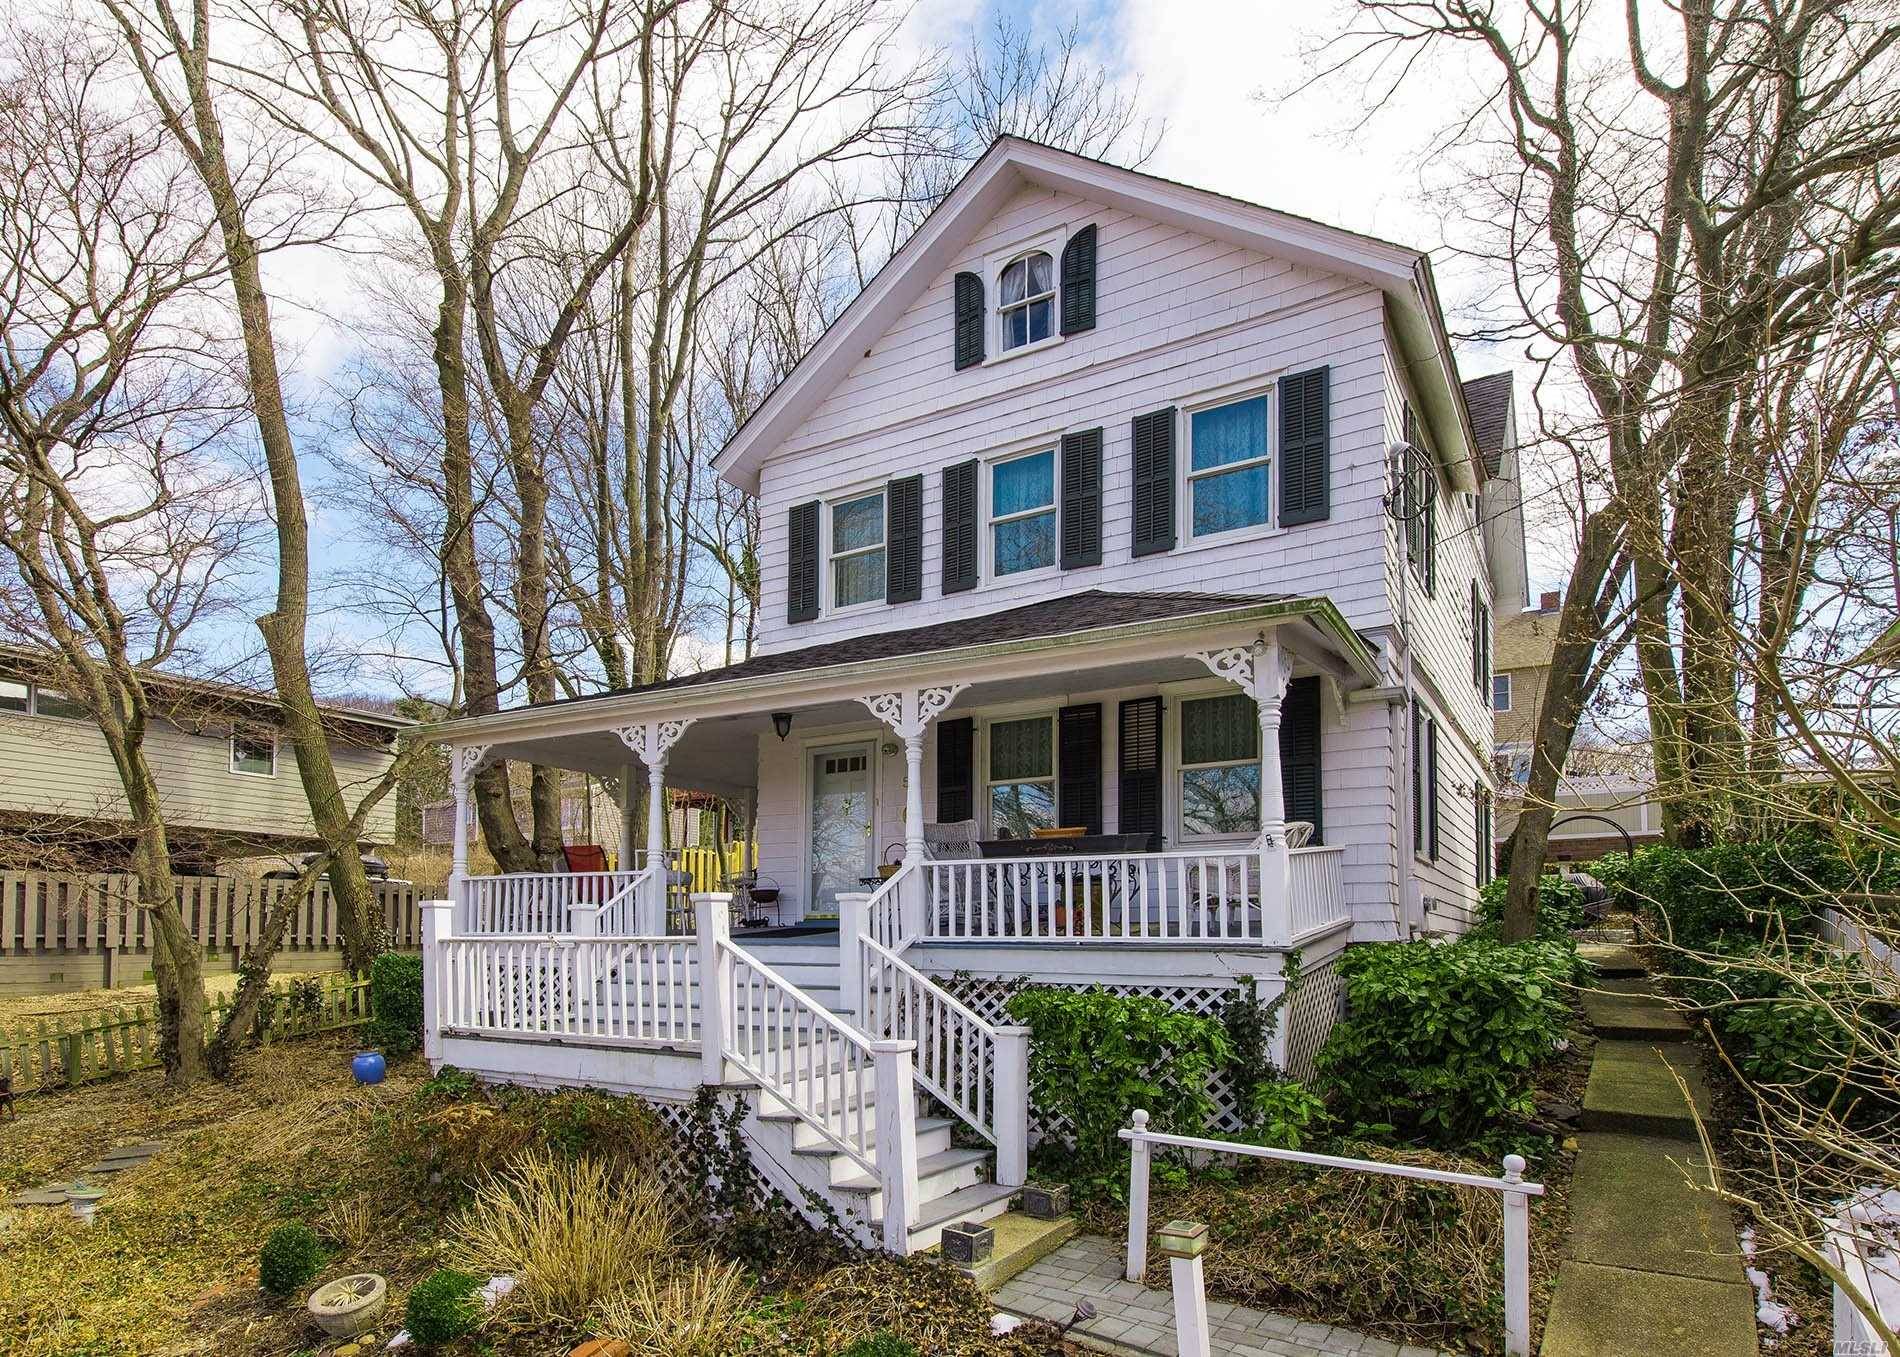 Great New Price ! ! ! ! Vintage home lovers run don't walk to this charming Victorian with winter water views of Hempstead Harbor.